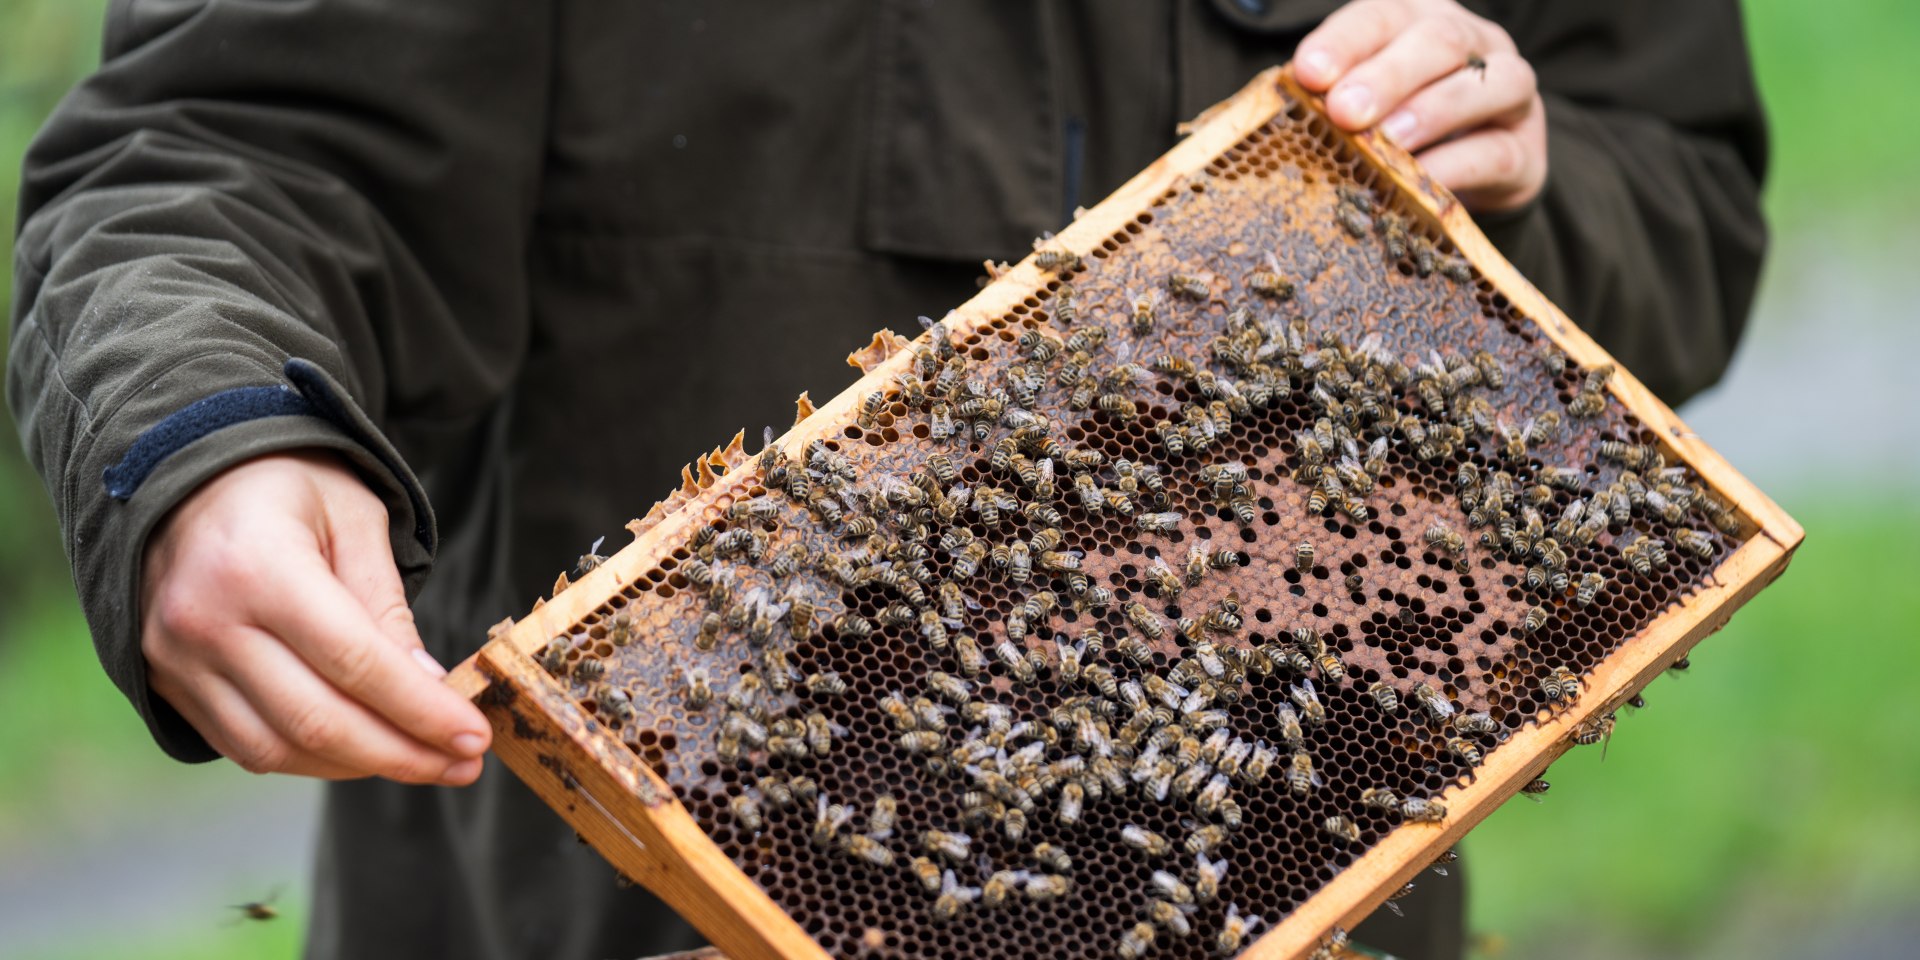 Drawer with bees and honey, © TourismusMarketing Niedersachsen GmbH 